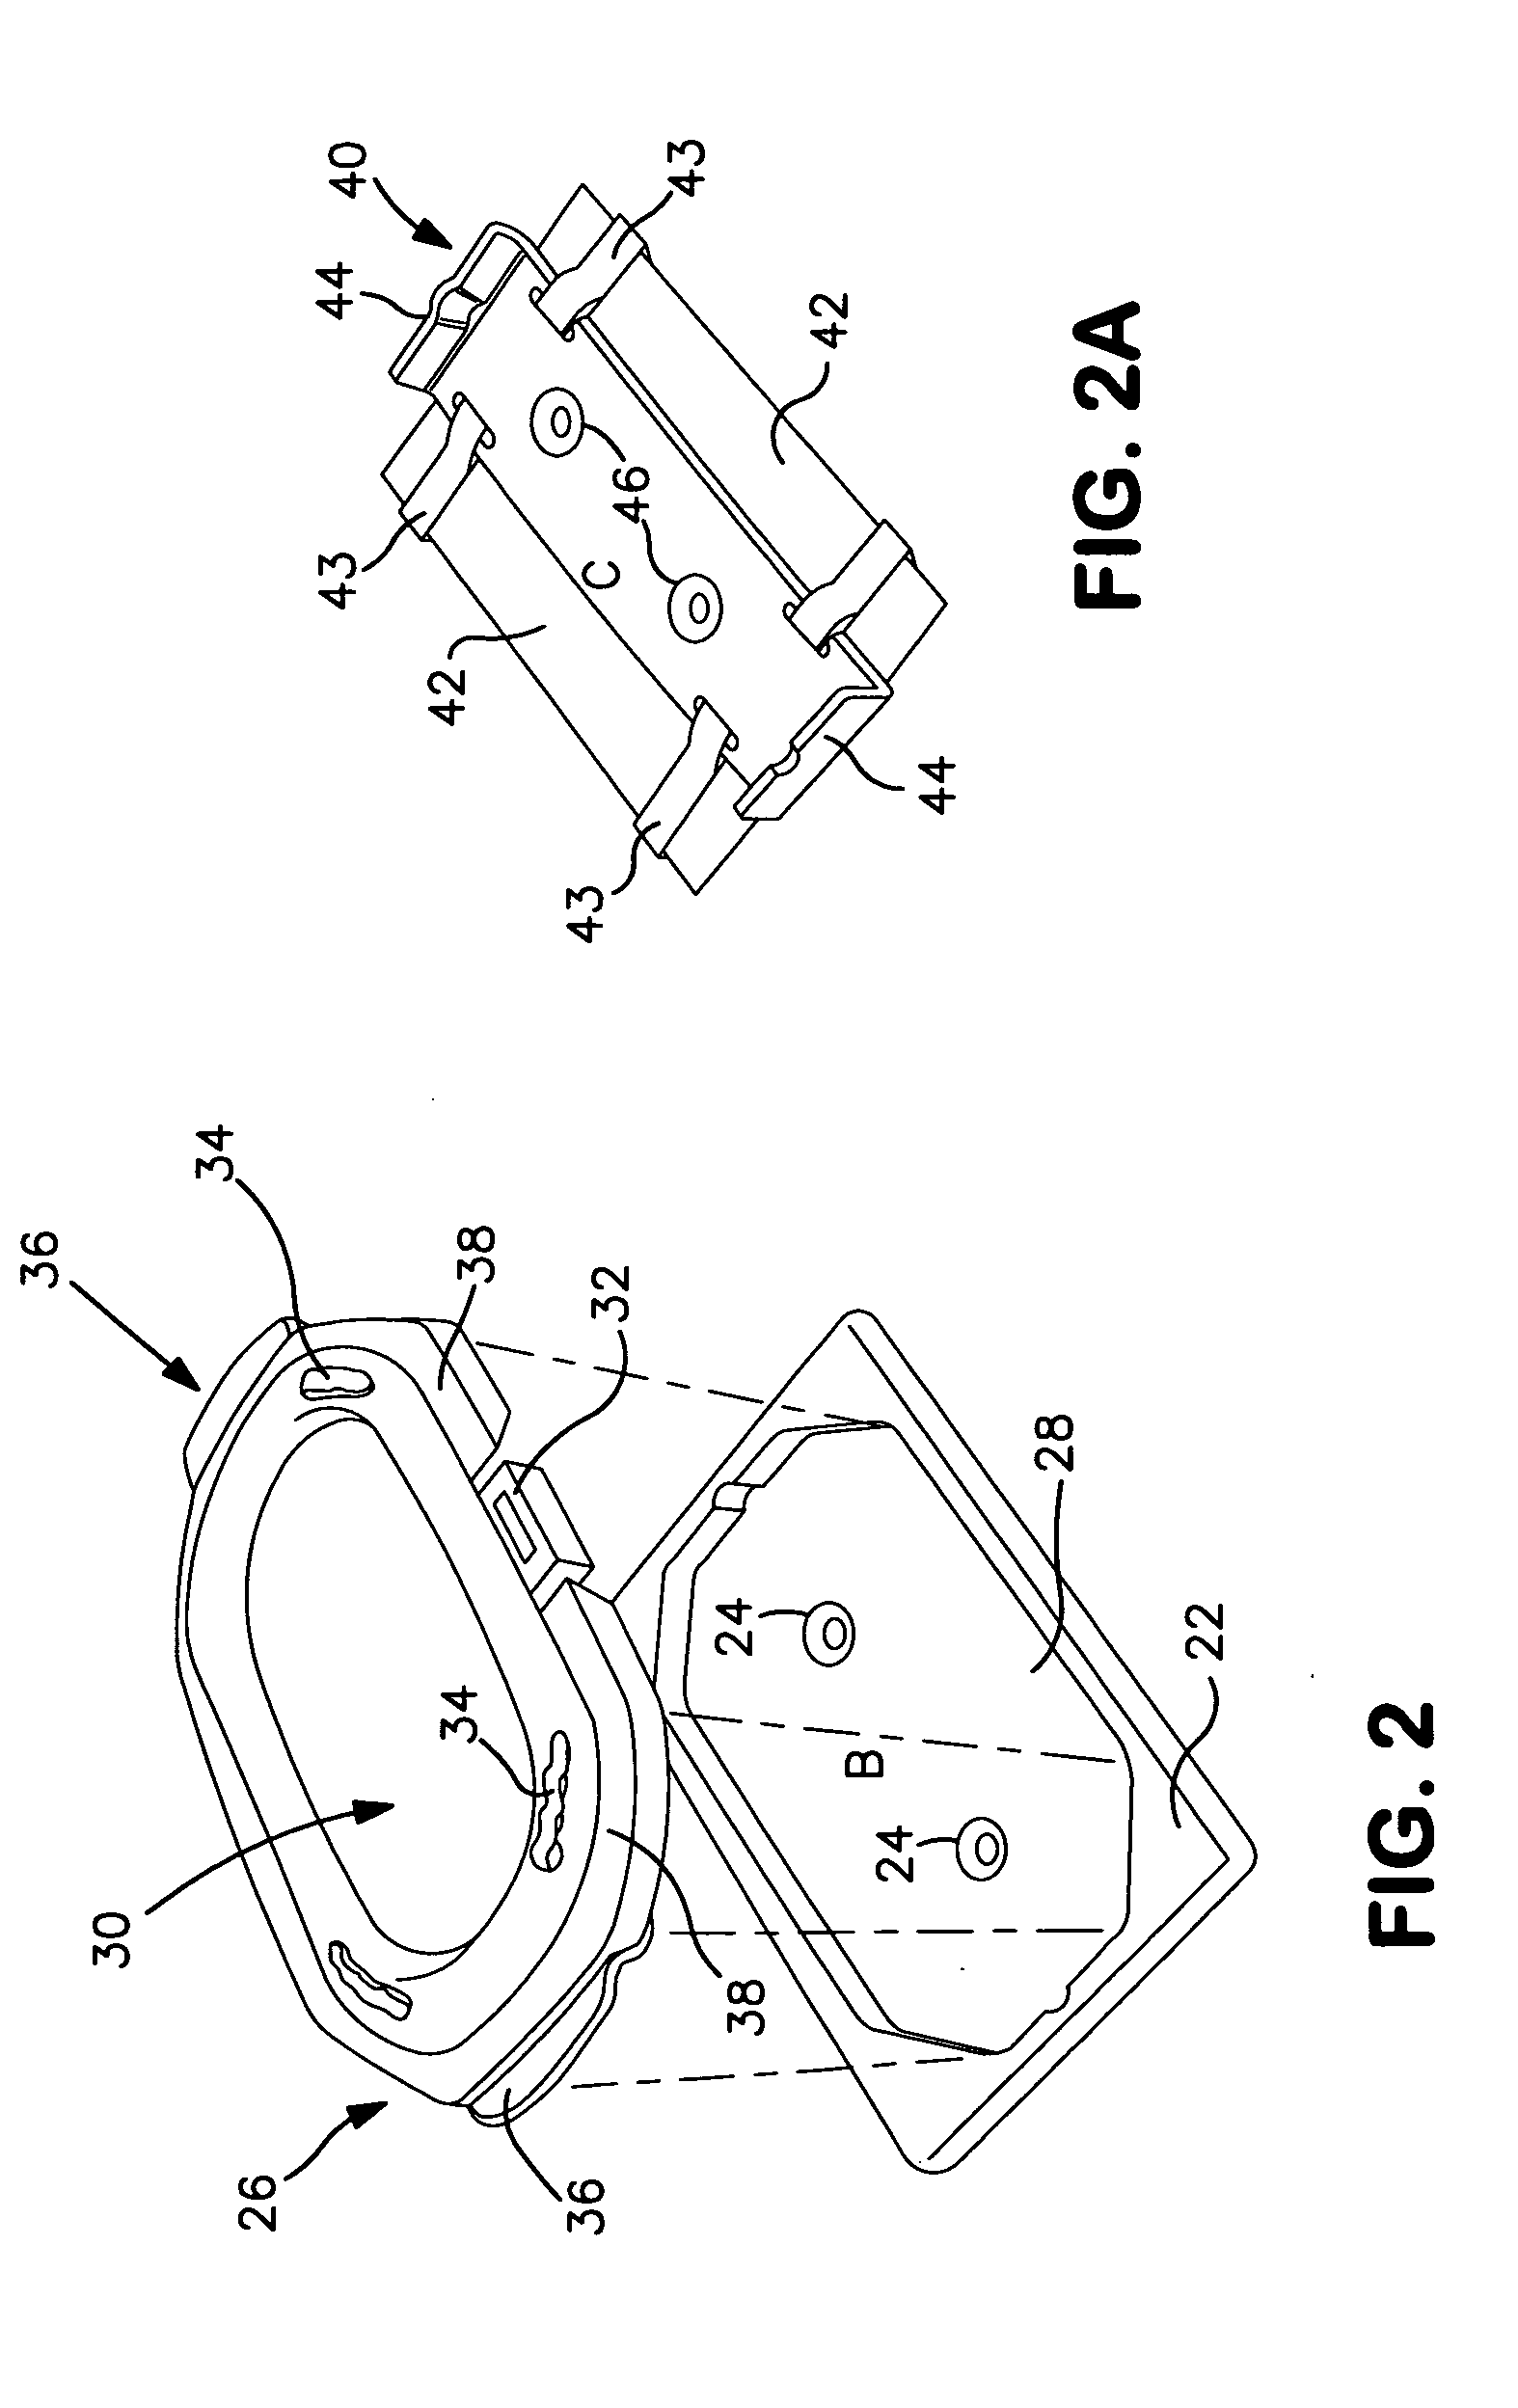 Apparatus to facilitate the transfer of patients between support platforms